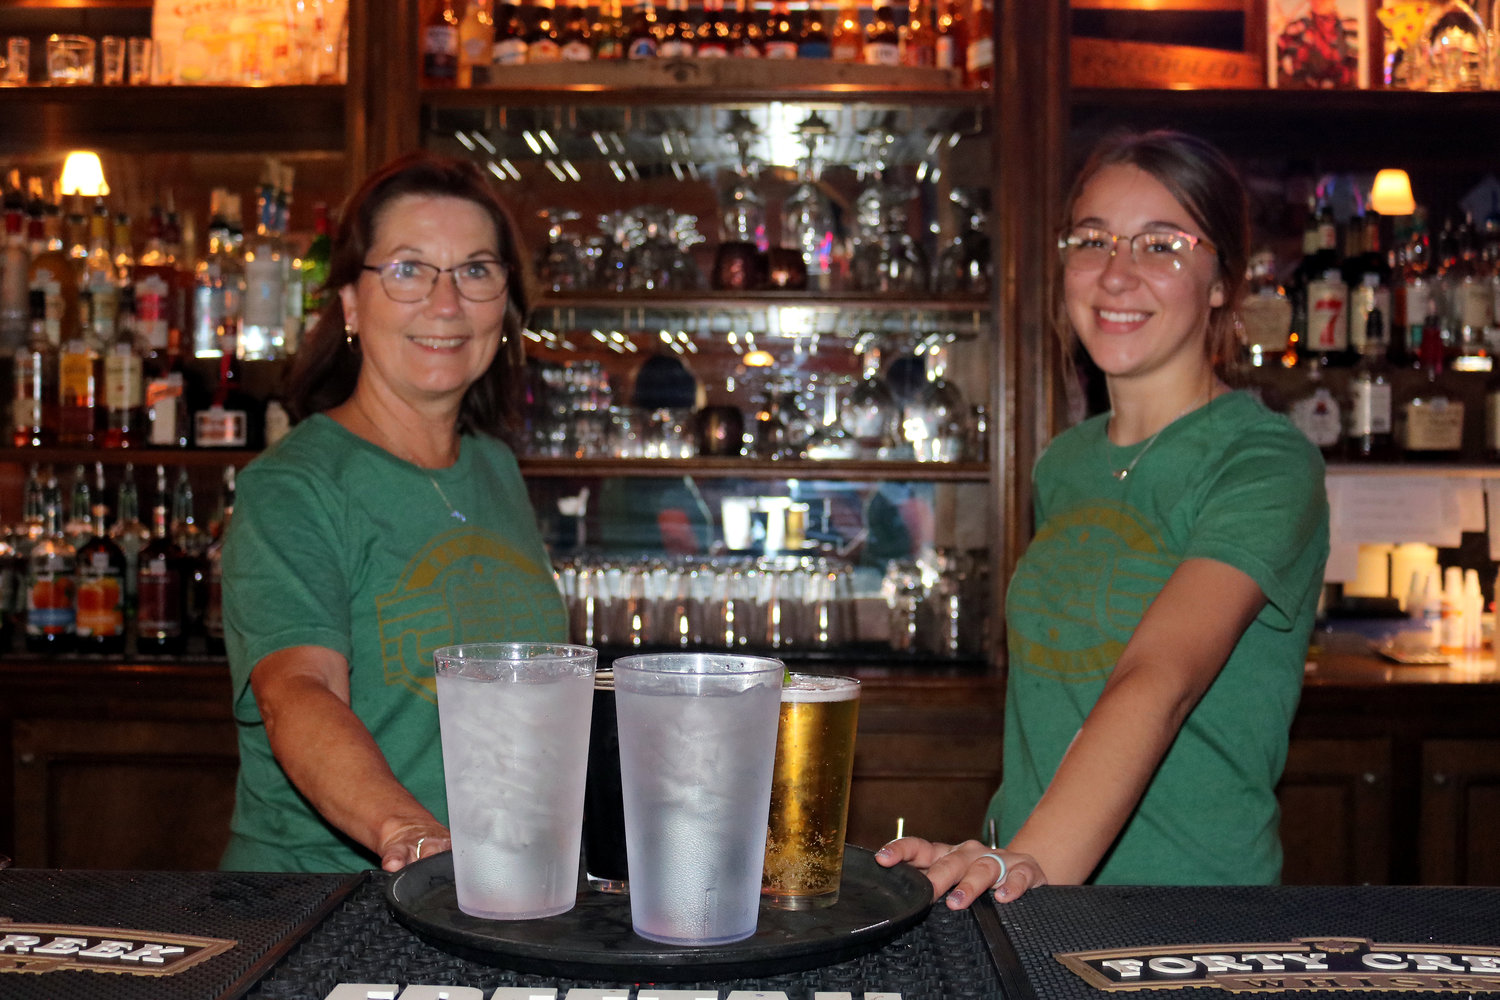 Happy to be of service at the Running M Bar & Grill are owner Marlene Metzler, left, and waitress Cameron Cardona.